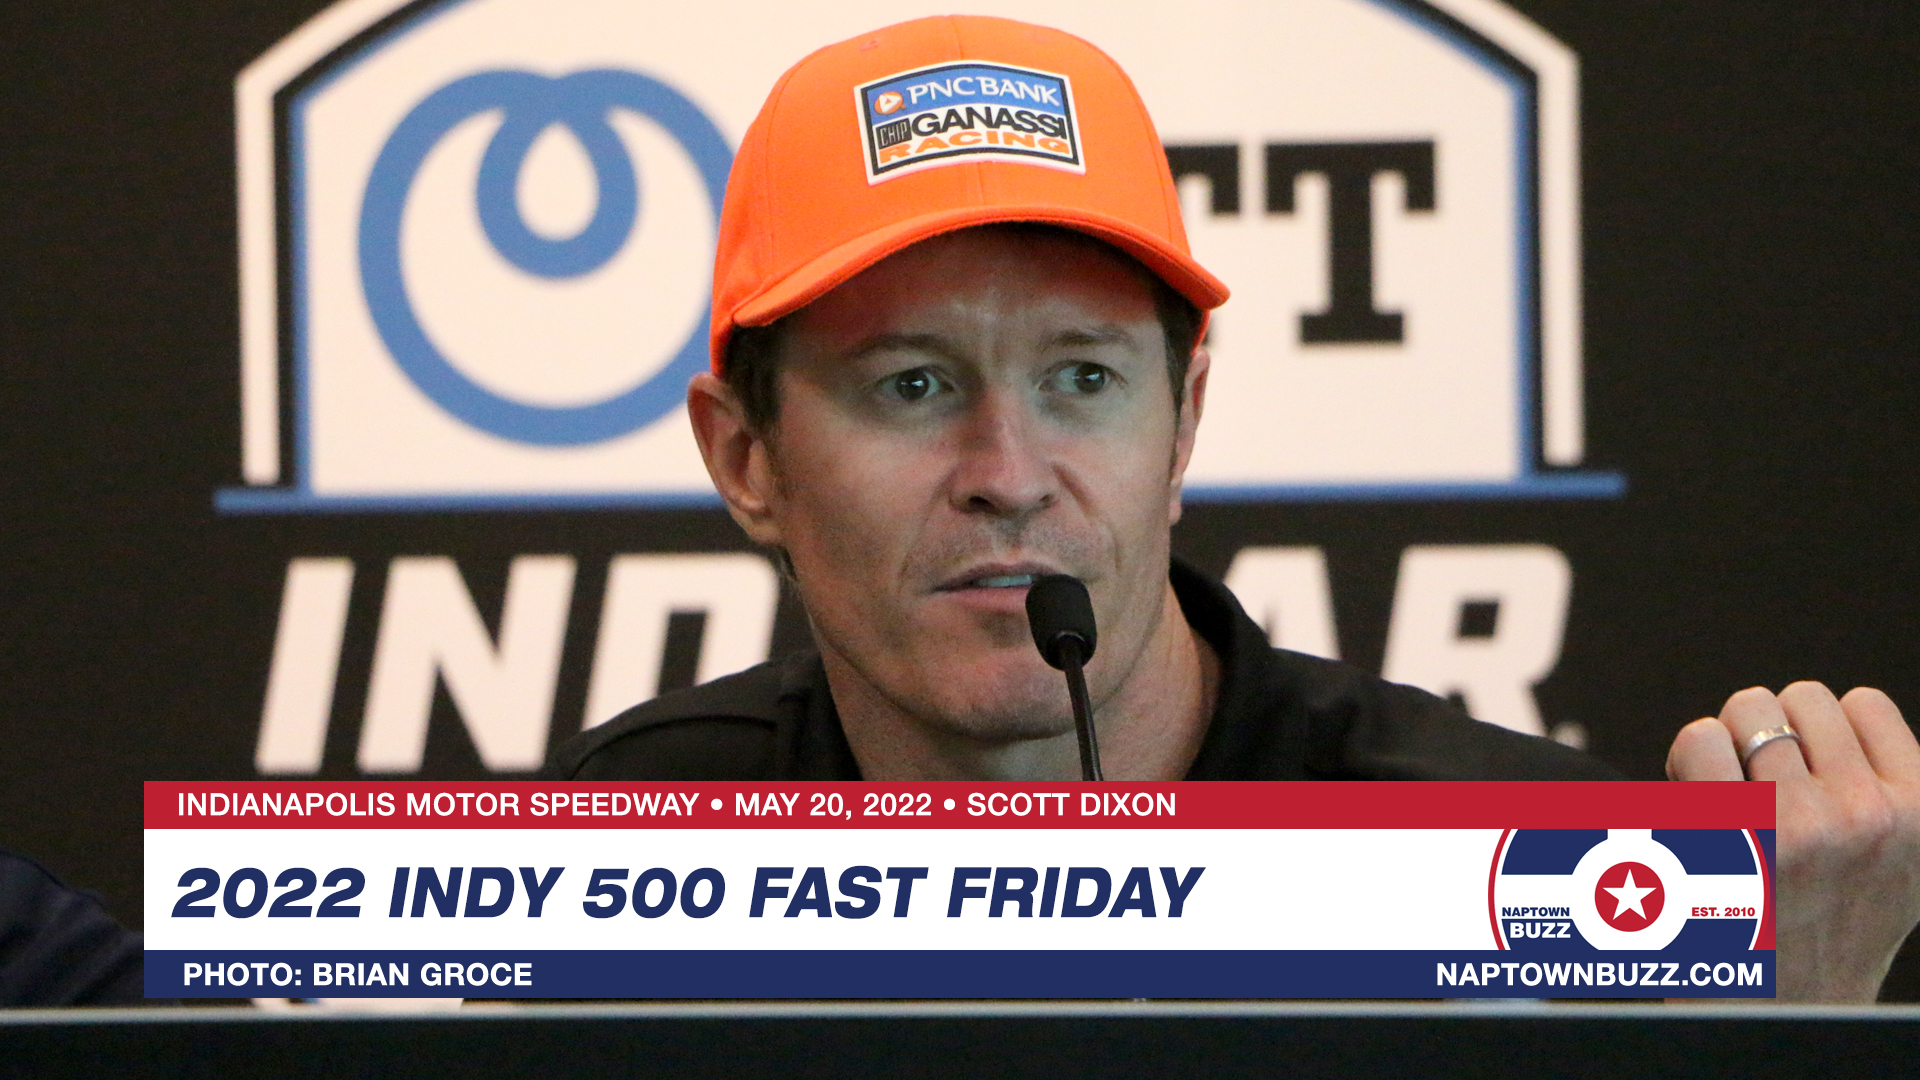 Scott Dixon on Indy 500 Fast Friday Practice at Indianapolis Motor Speedway on May 20, 2022